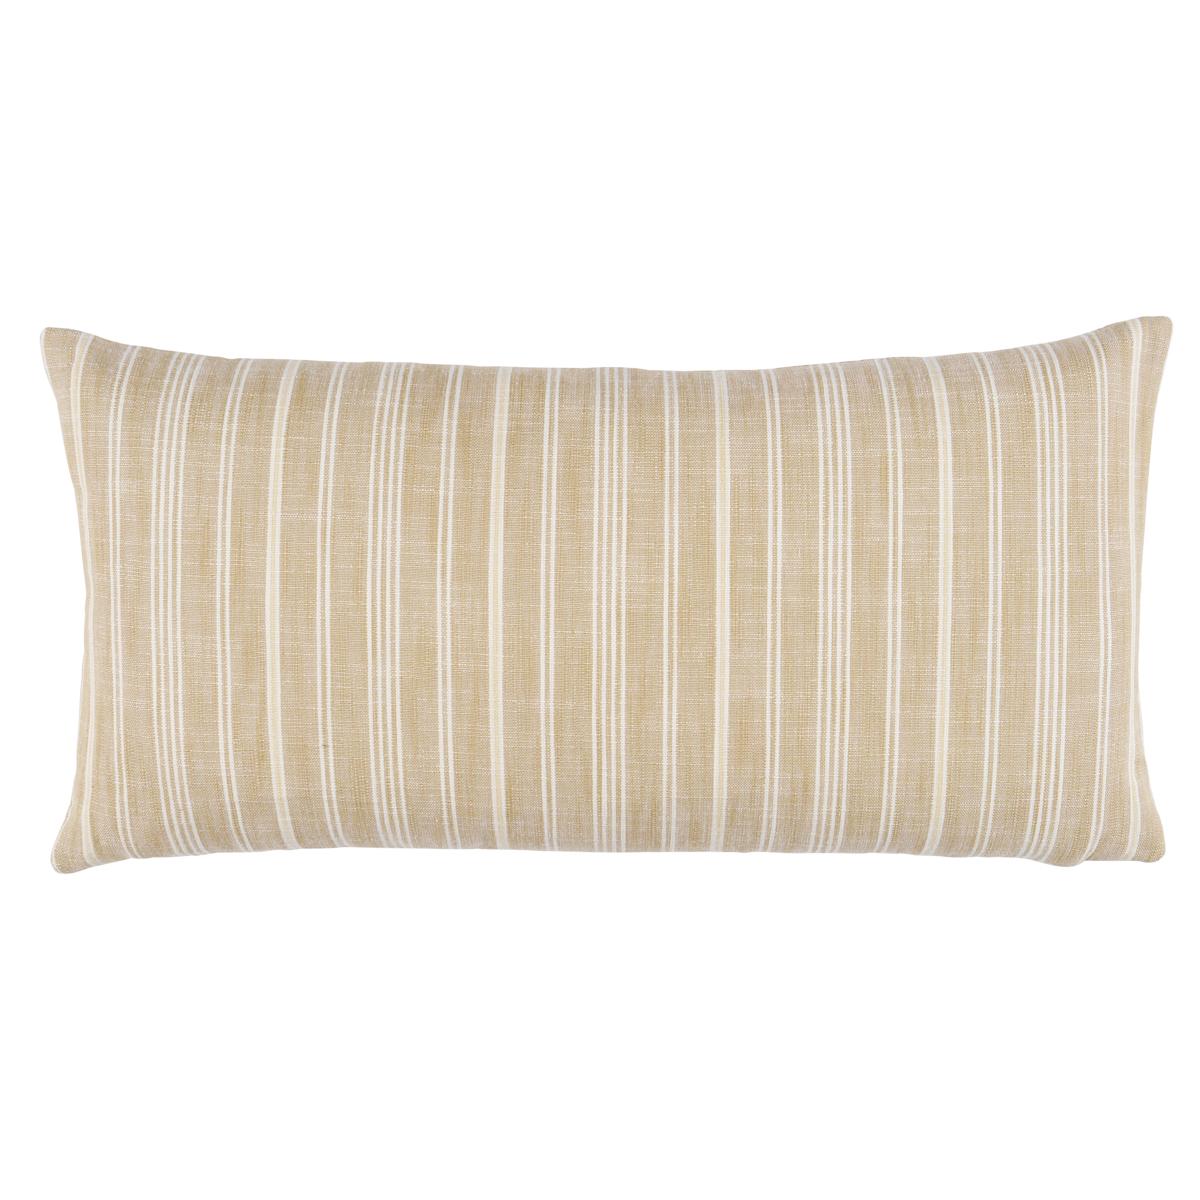 Lucy Stripe Pillow in Neutral 24 x 12" For Sale